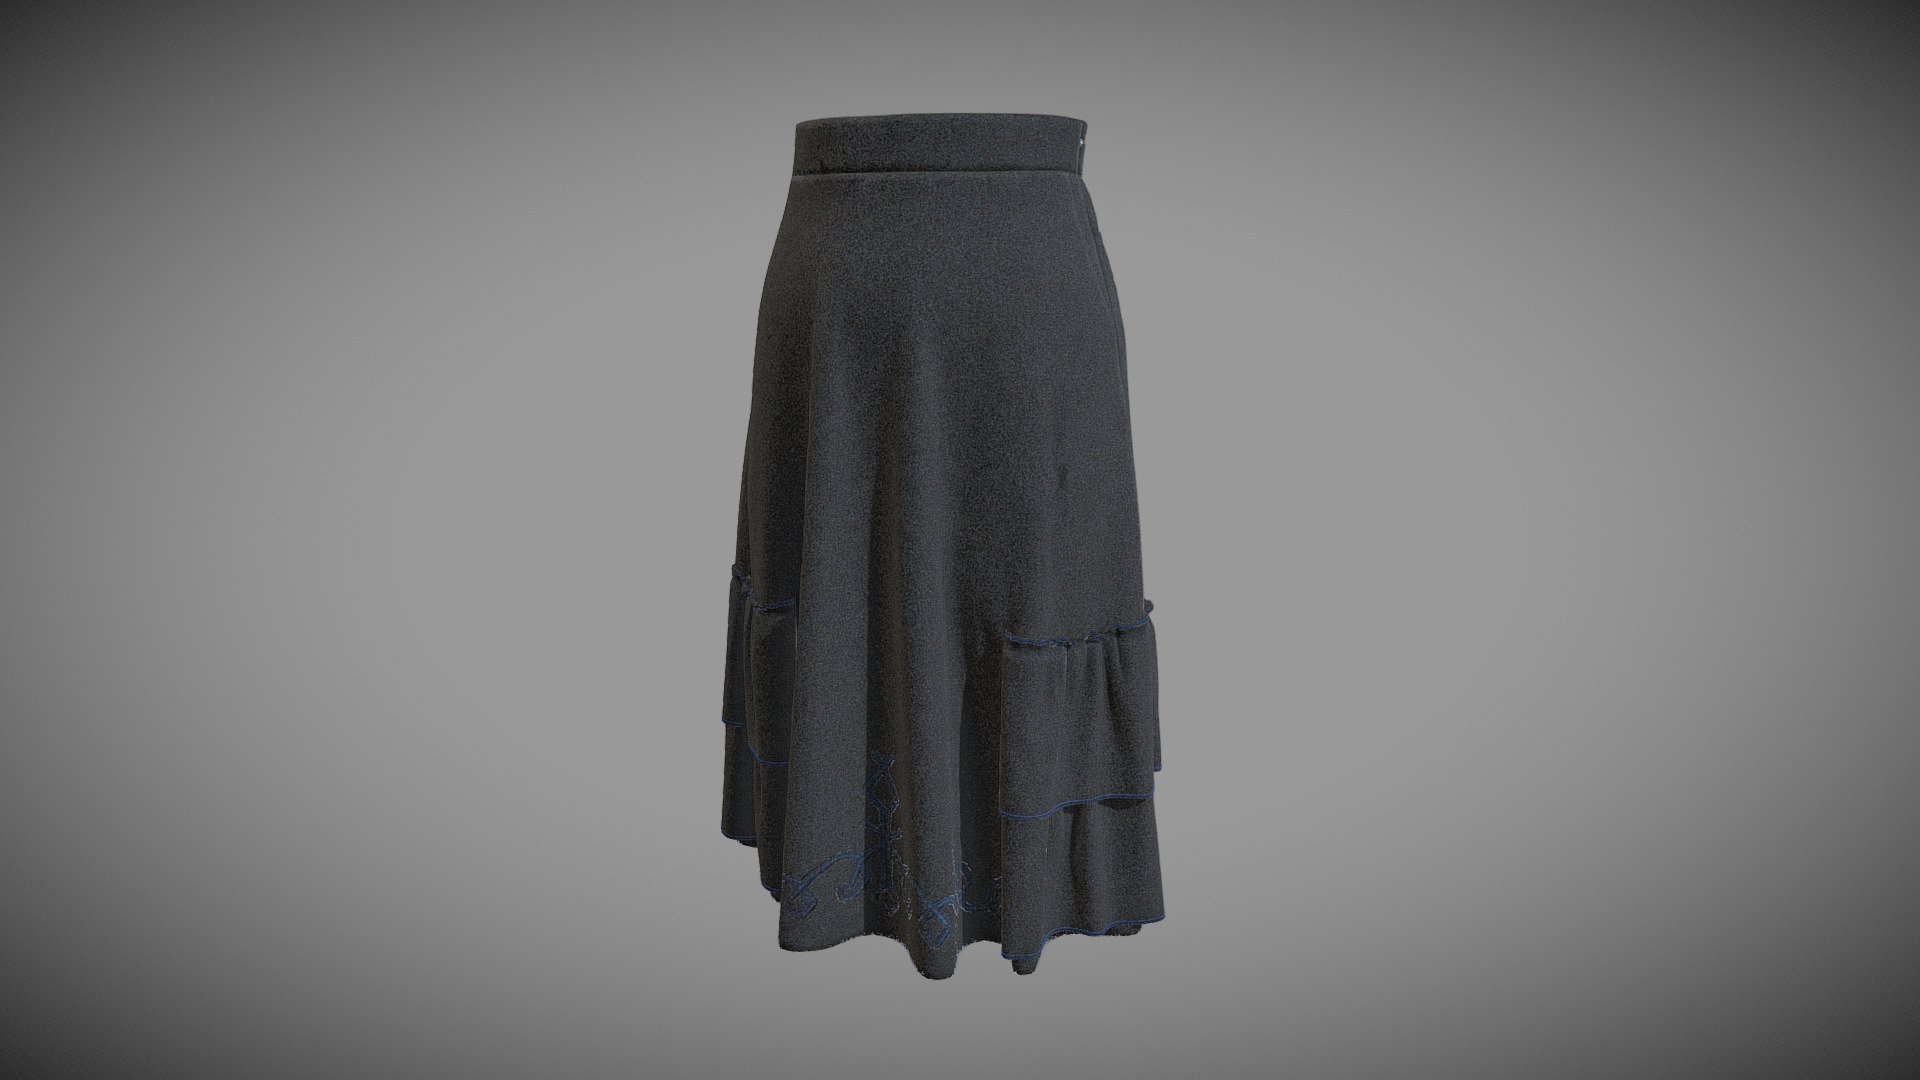 The 3D model presents a 3D reconstruction of a skirt (Design patent RU130561). The skirt is made of wool multiple colour fabric . It has a belt  and two front hip pockets. The bottom part of the skirt is decorated with two ruffles. The 3D model was created in Clo3D software, textured in Substance Painter and post-processed in 3dsMax.

The authors of the 3D model are Mariia Moskvina and Aleksei Moskvin (Saint Petersburg State University of Industrial Technologies and Design)

https://independent.academia.edu/MariiaMoskvina

https://independent.academia.edu/AlekseiMoskvin - Skirt (Design patent RU130561) - 3D model by Mariia Moskvina (@mariia89) 3d model